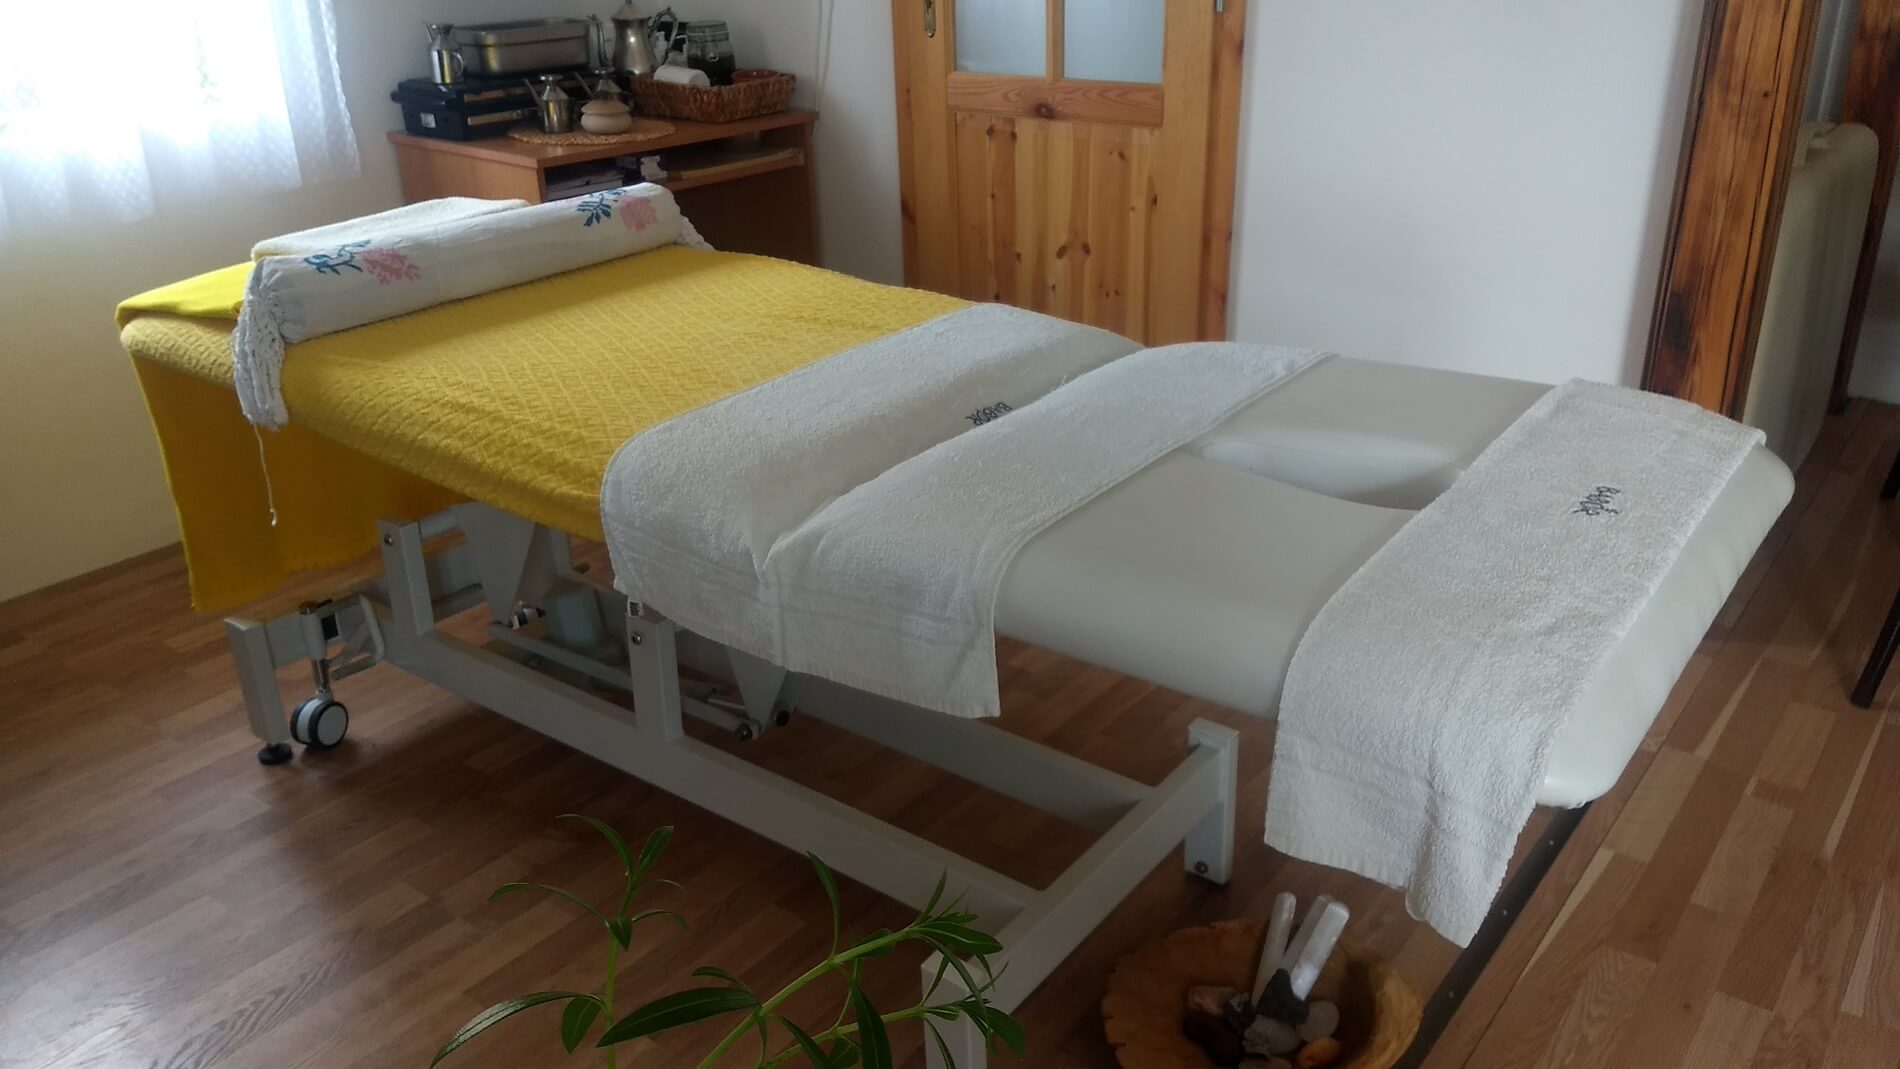 Even better spa with a comprehensive range of massages